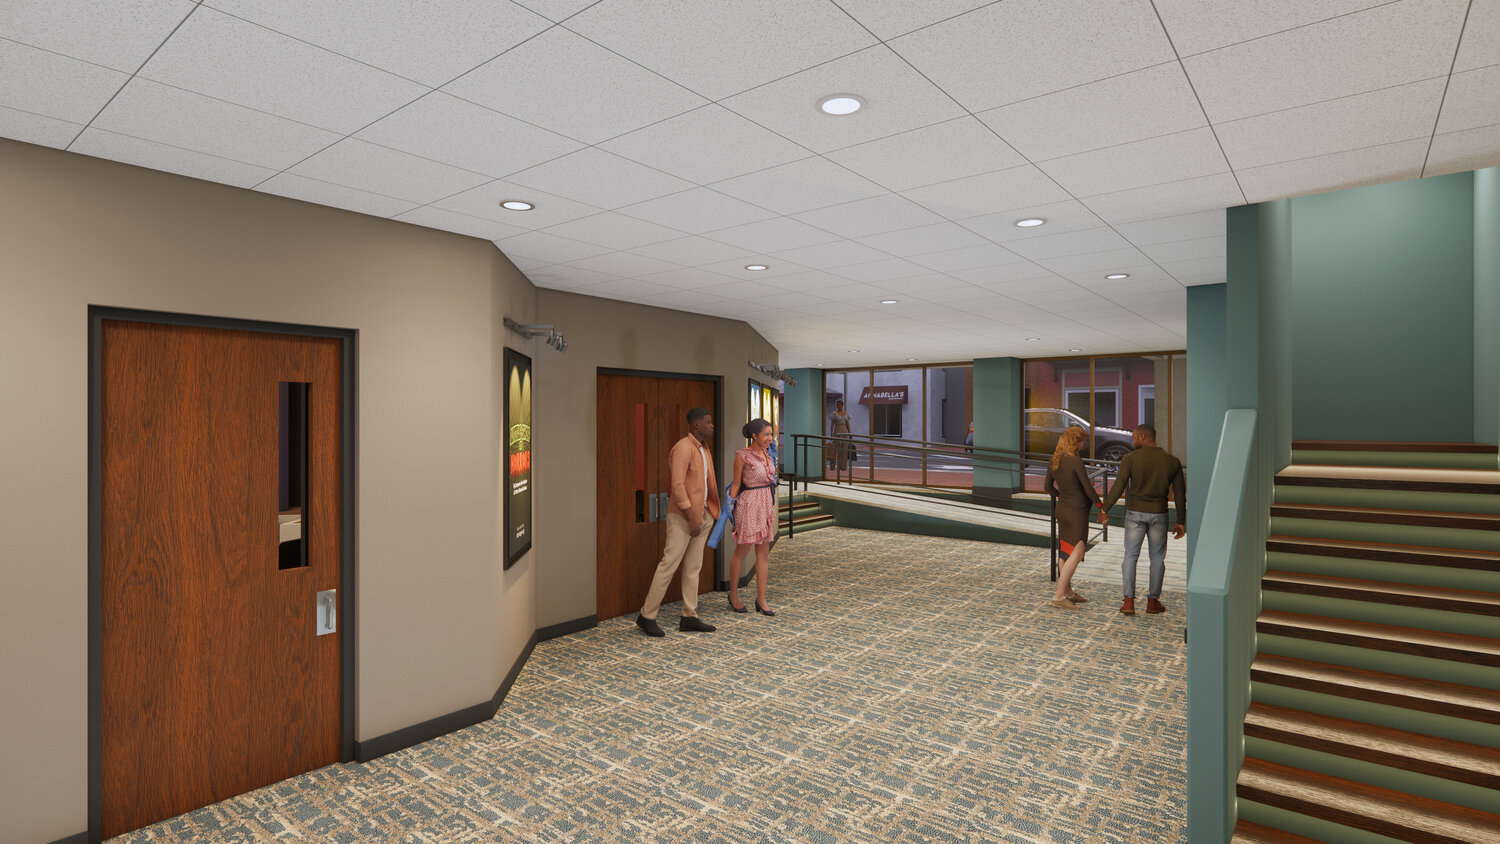 A rendering of the new lobby, following renovations at Bristol Riverside Theatre.